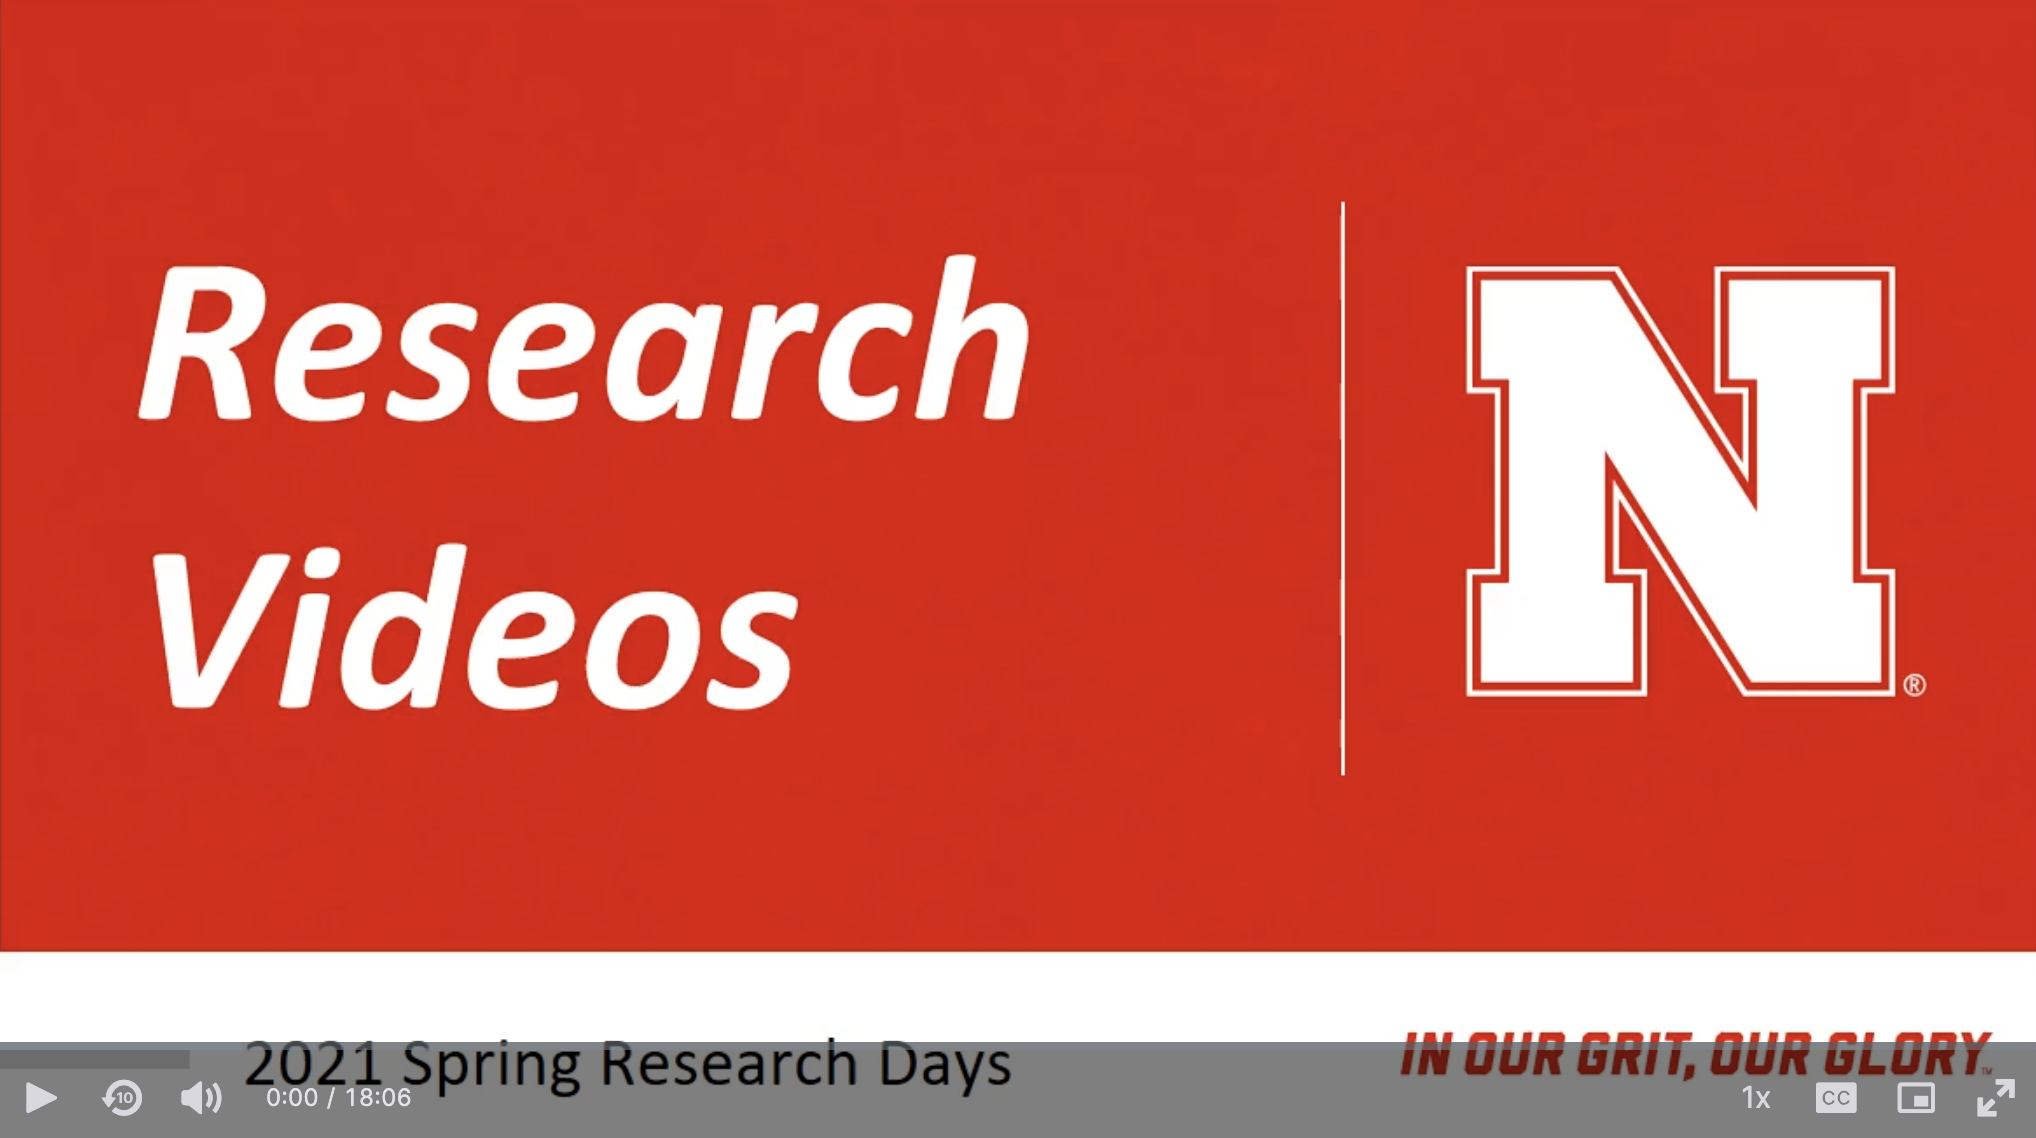 Learn how to share your research or creative activity through video presentations for Student Research Days and future conferences.